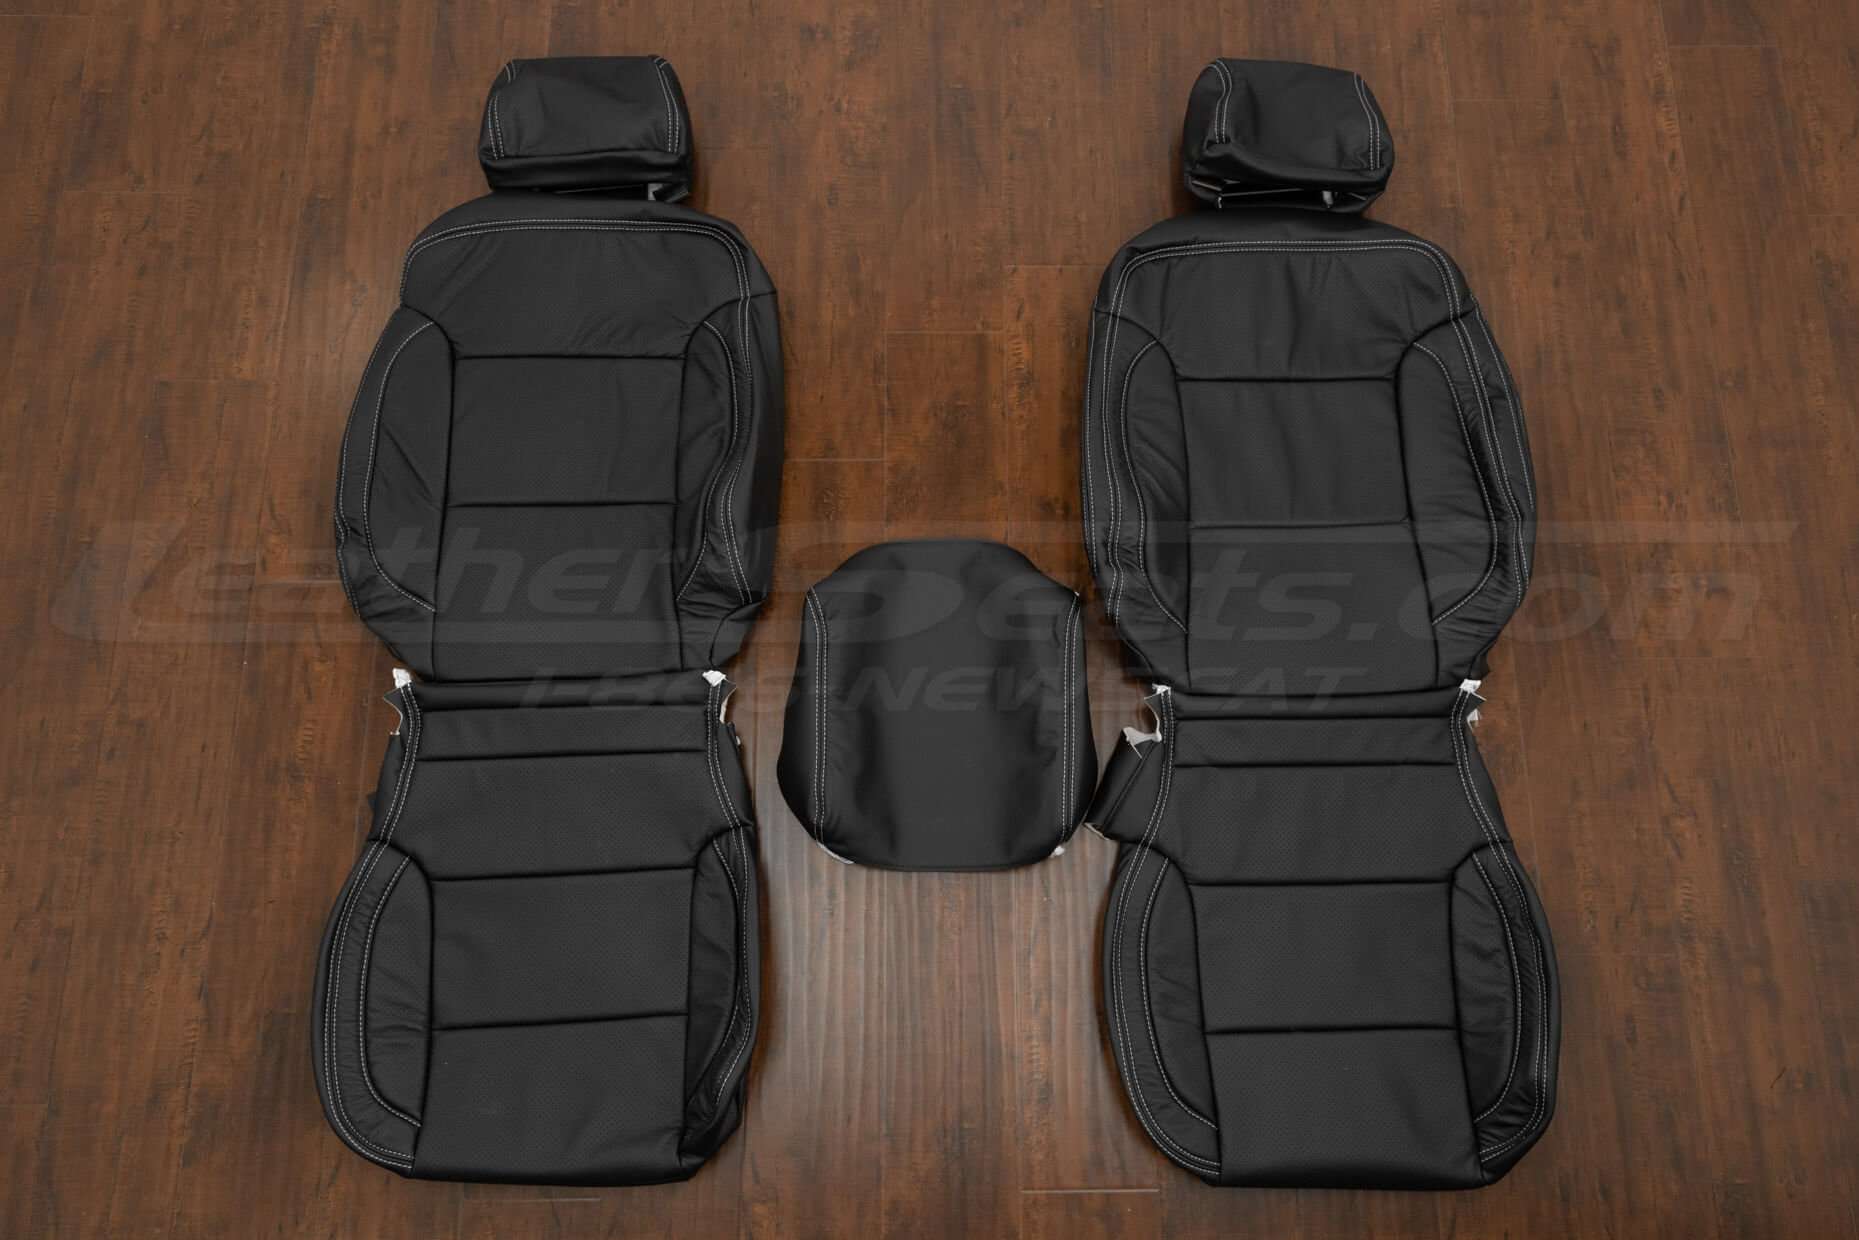 2015 GMC Yukon SUV Leather Seat Uphosltery Kit - Black - Front seat upholstery iwith console lid cover